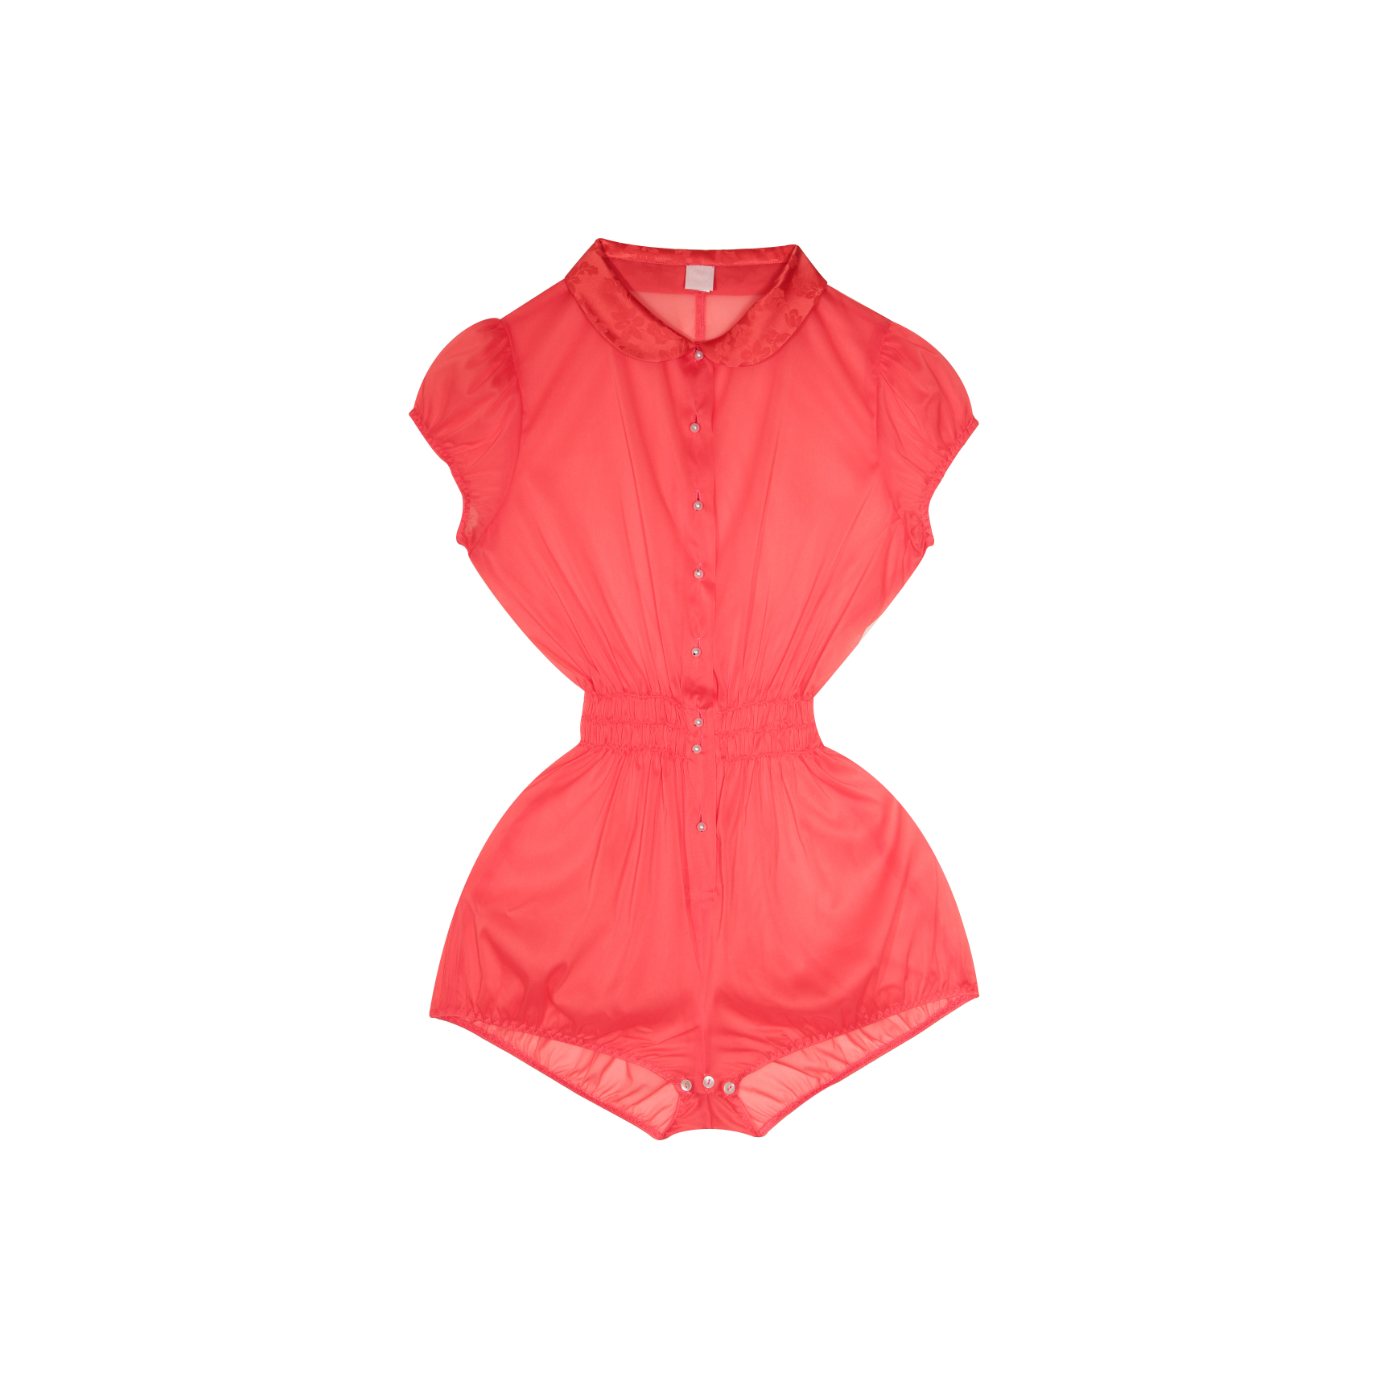 Babyloo” Playsuit | Fifi Chachnil - Official website